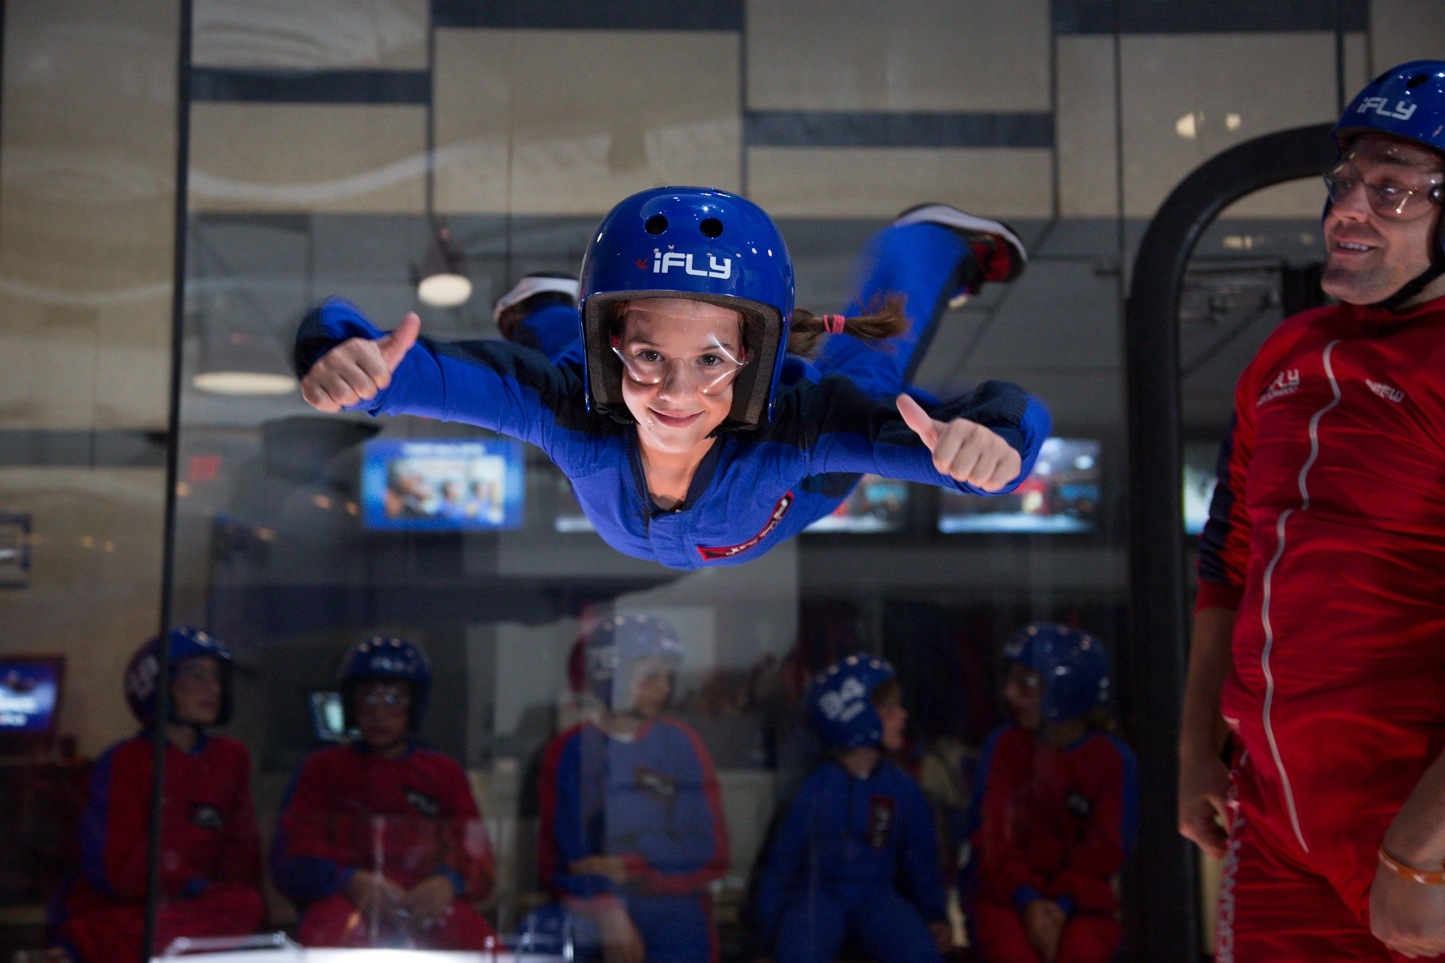 iFly Indoor Skydiving Visit Plano